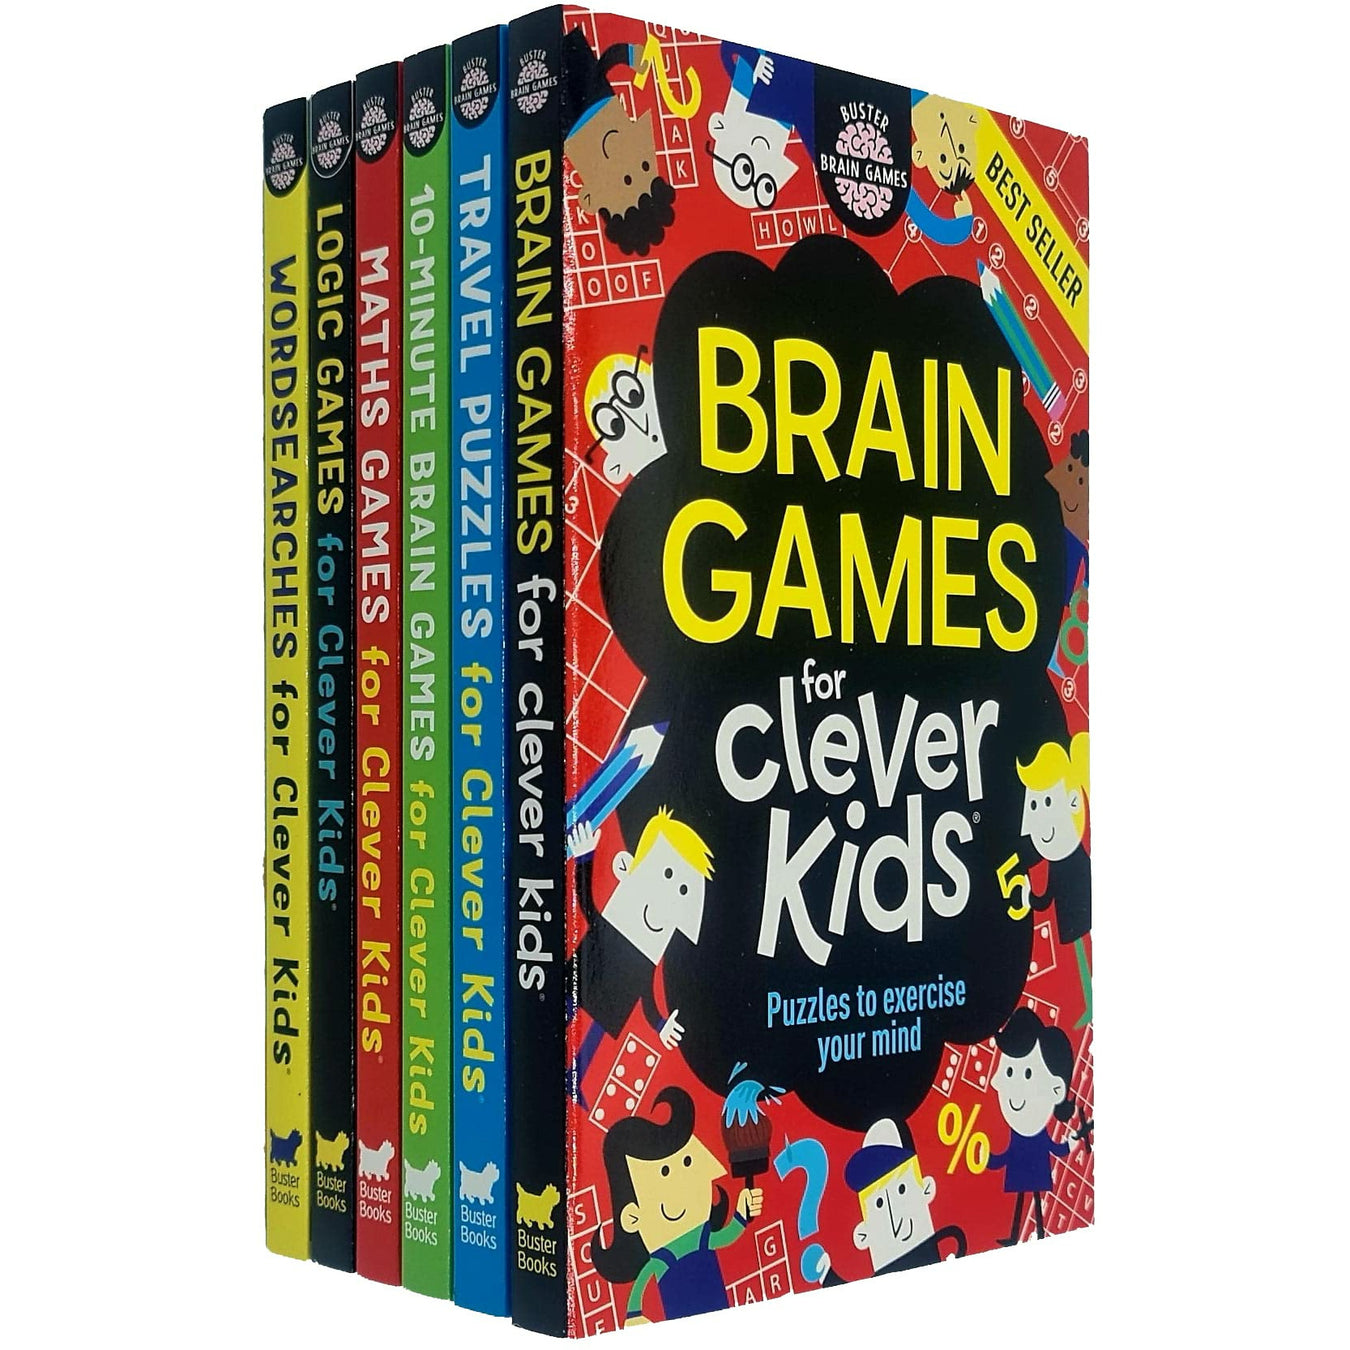 Brain games Collection